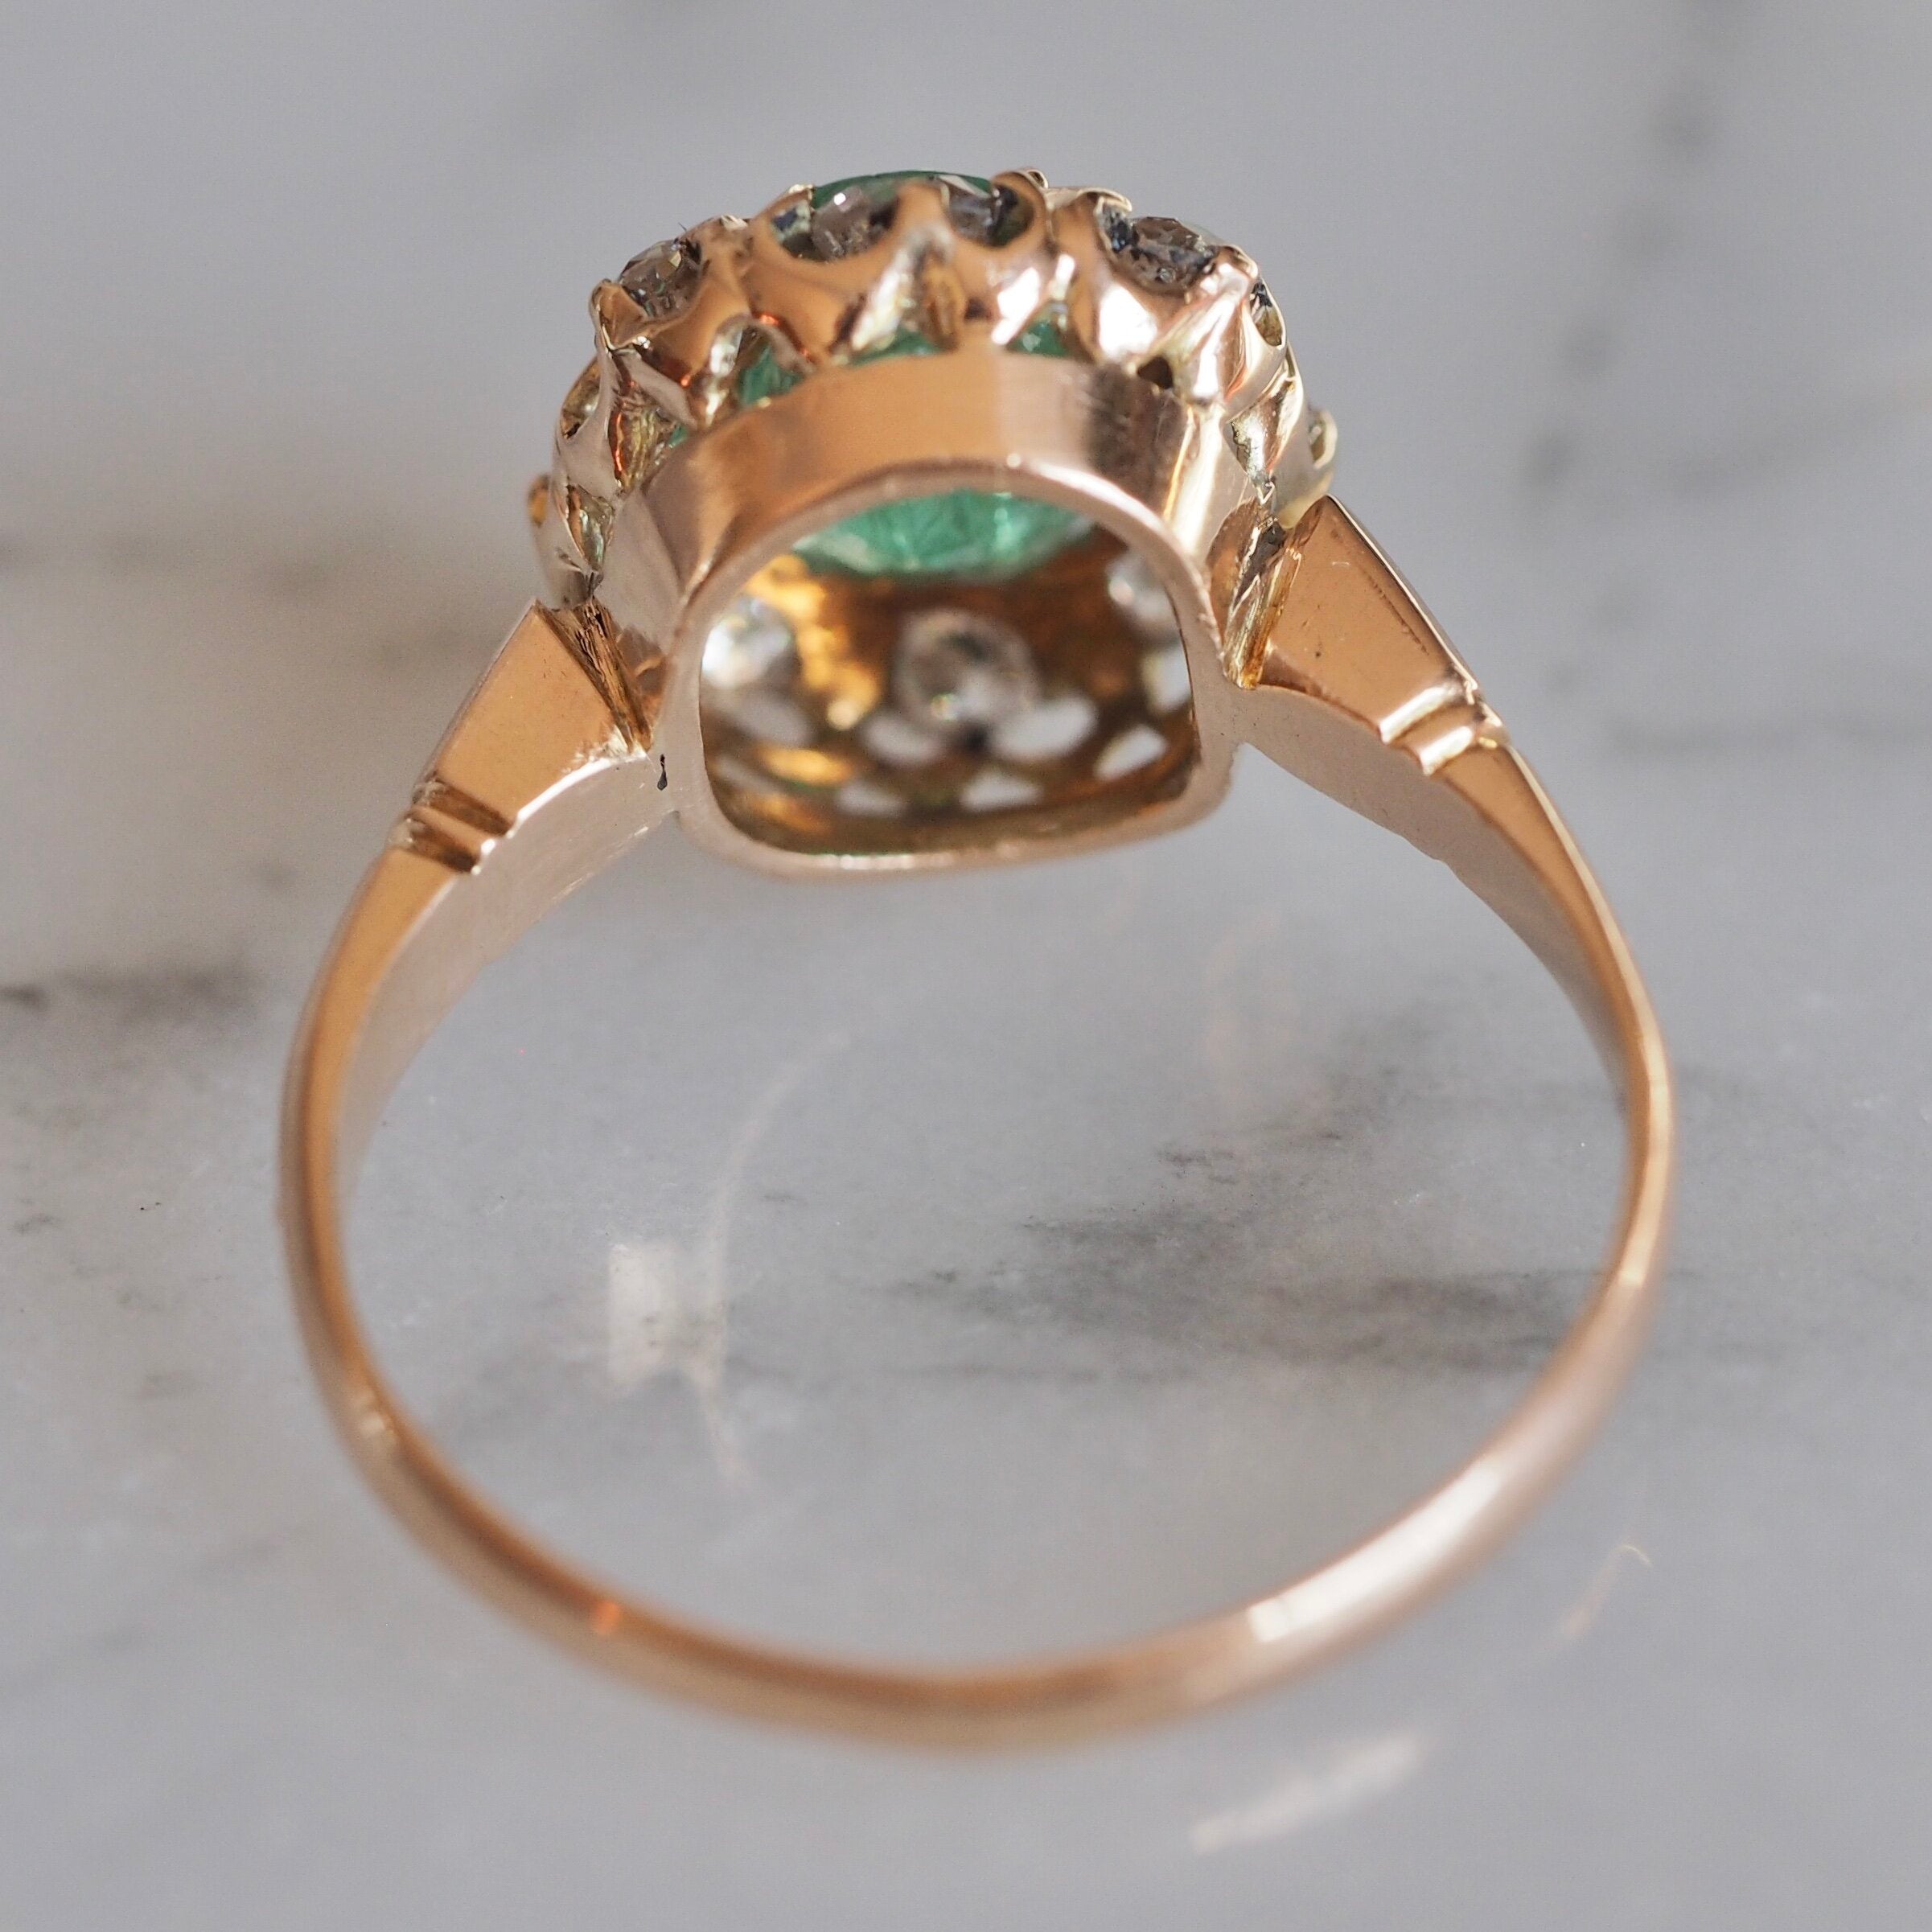 Antique Victorian 18k Gold Emerald and Diamond Halo Ring